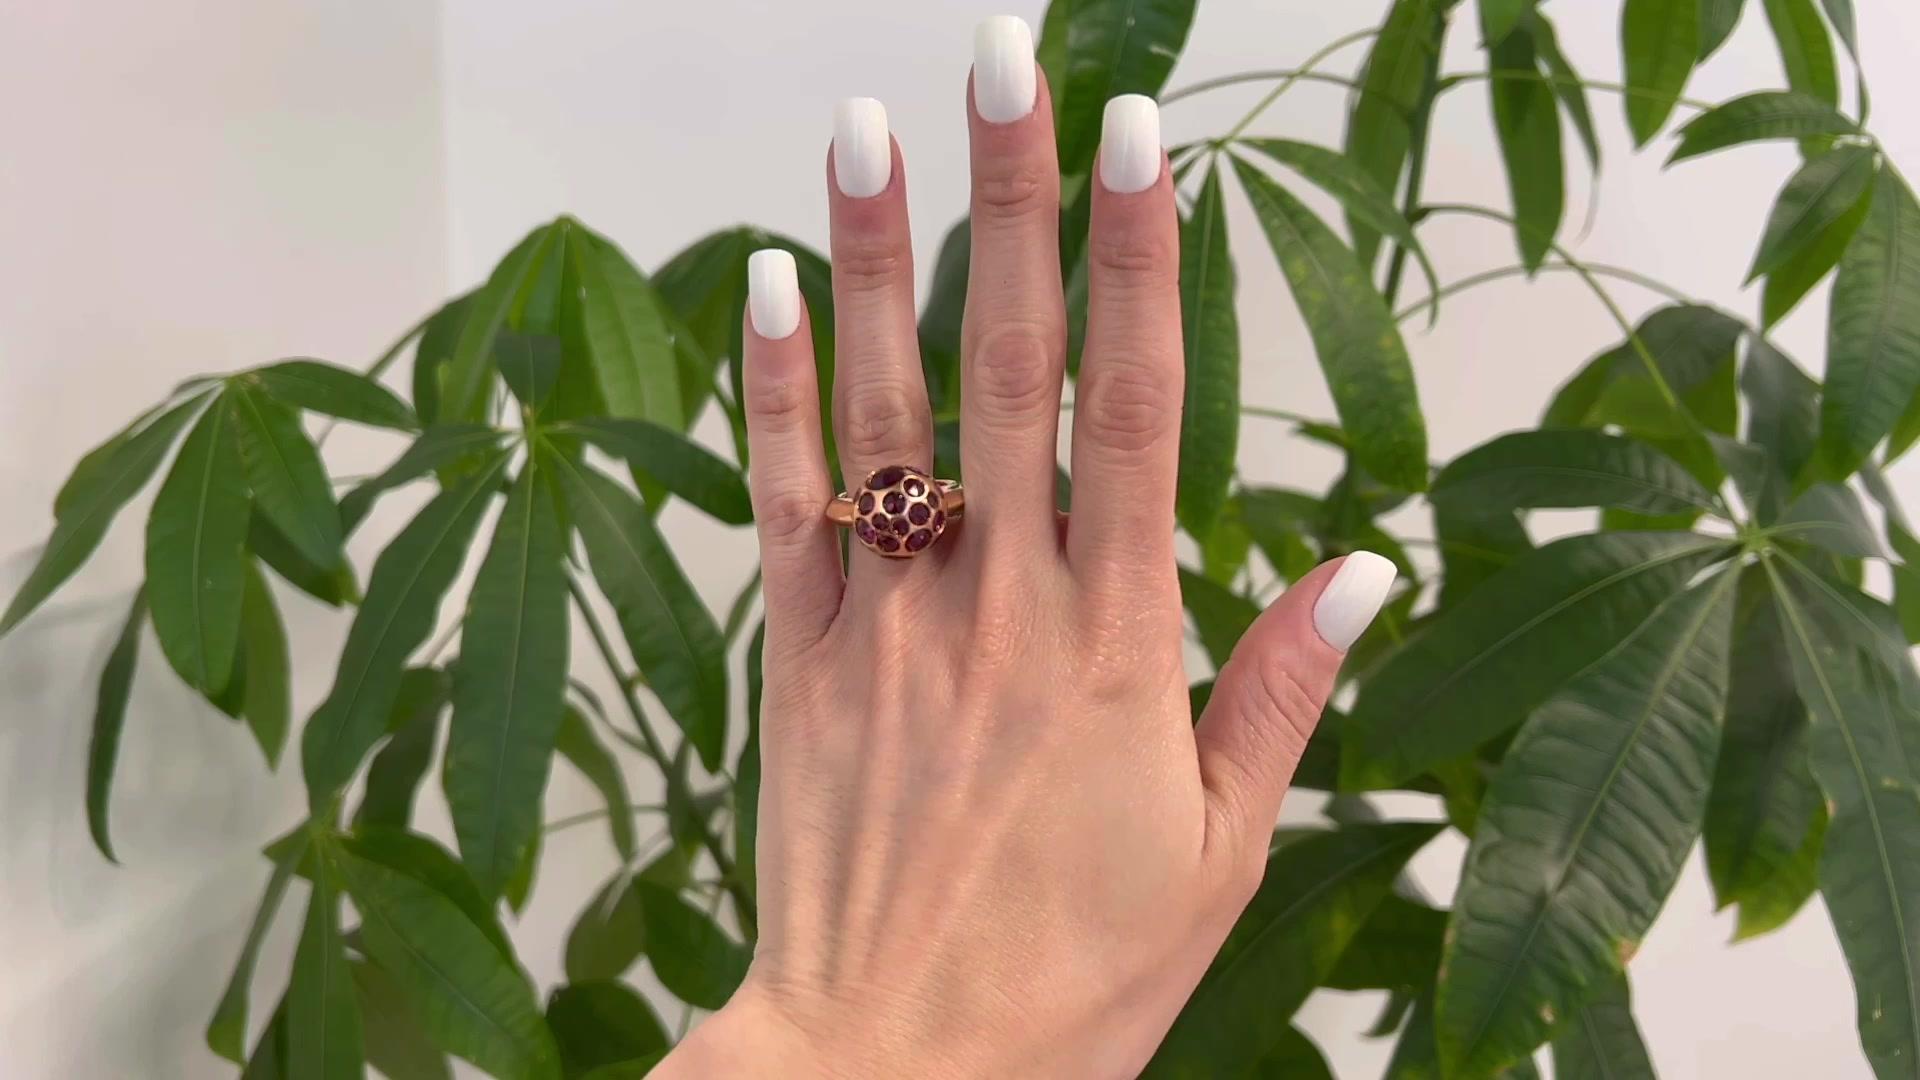 One Pomellato Italian Rhodolite Garnet 18 Karat Rose Gold Harem Cocktail Ring. Featuring 28 rose cut rhodolite garnets with a total weight of approximately 12.40 carats. Crafted in 18 karat rose gold signed Pomellato with Italian hallmarks. Circa